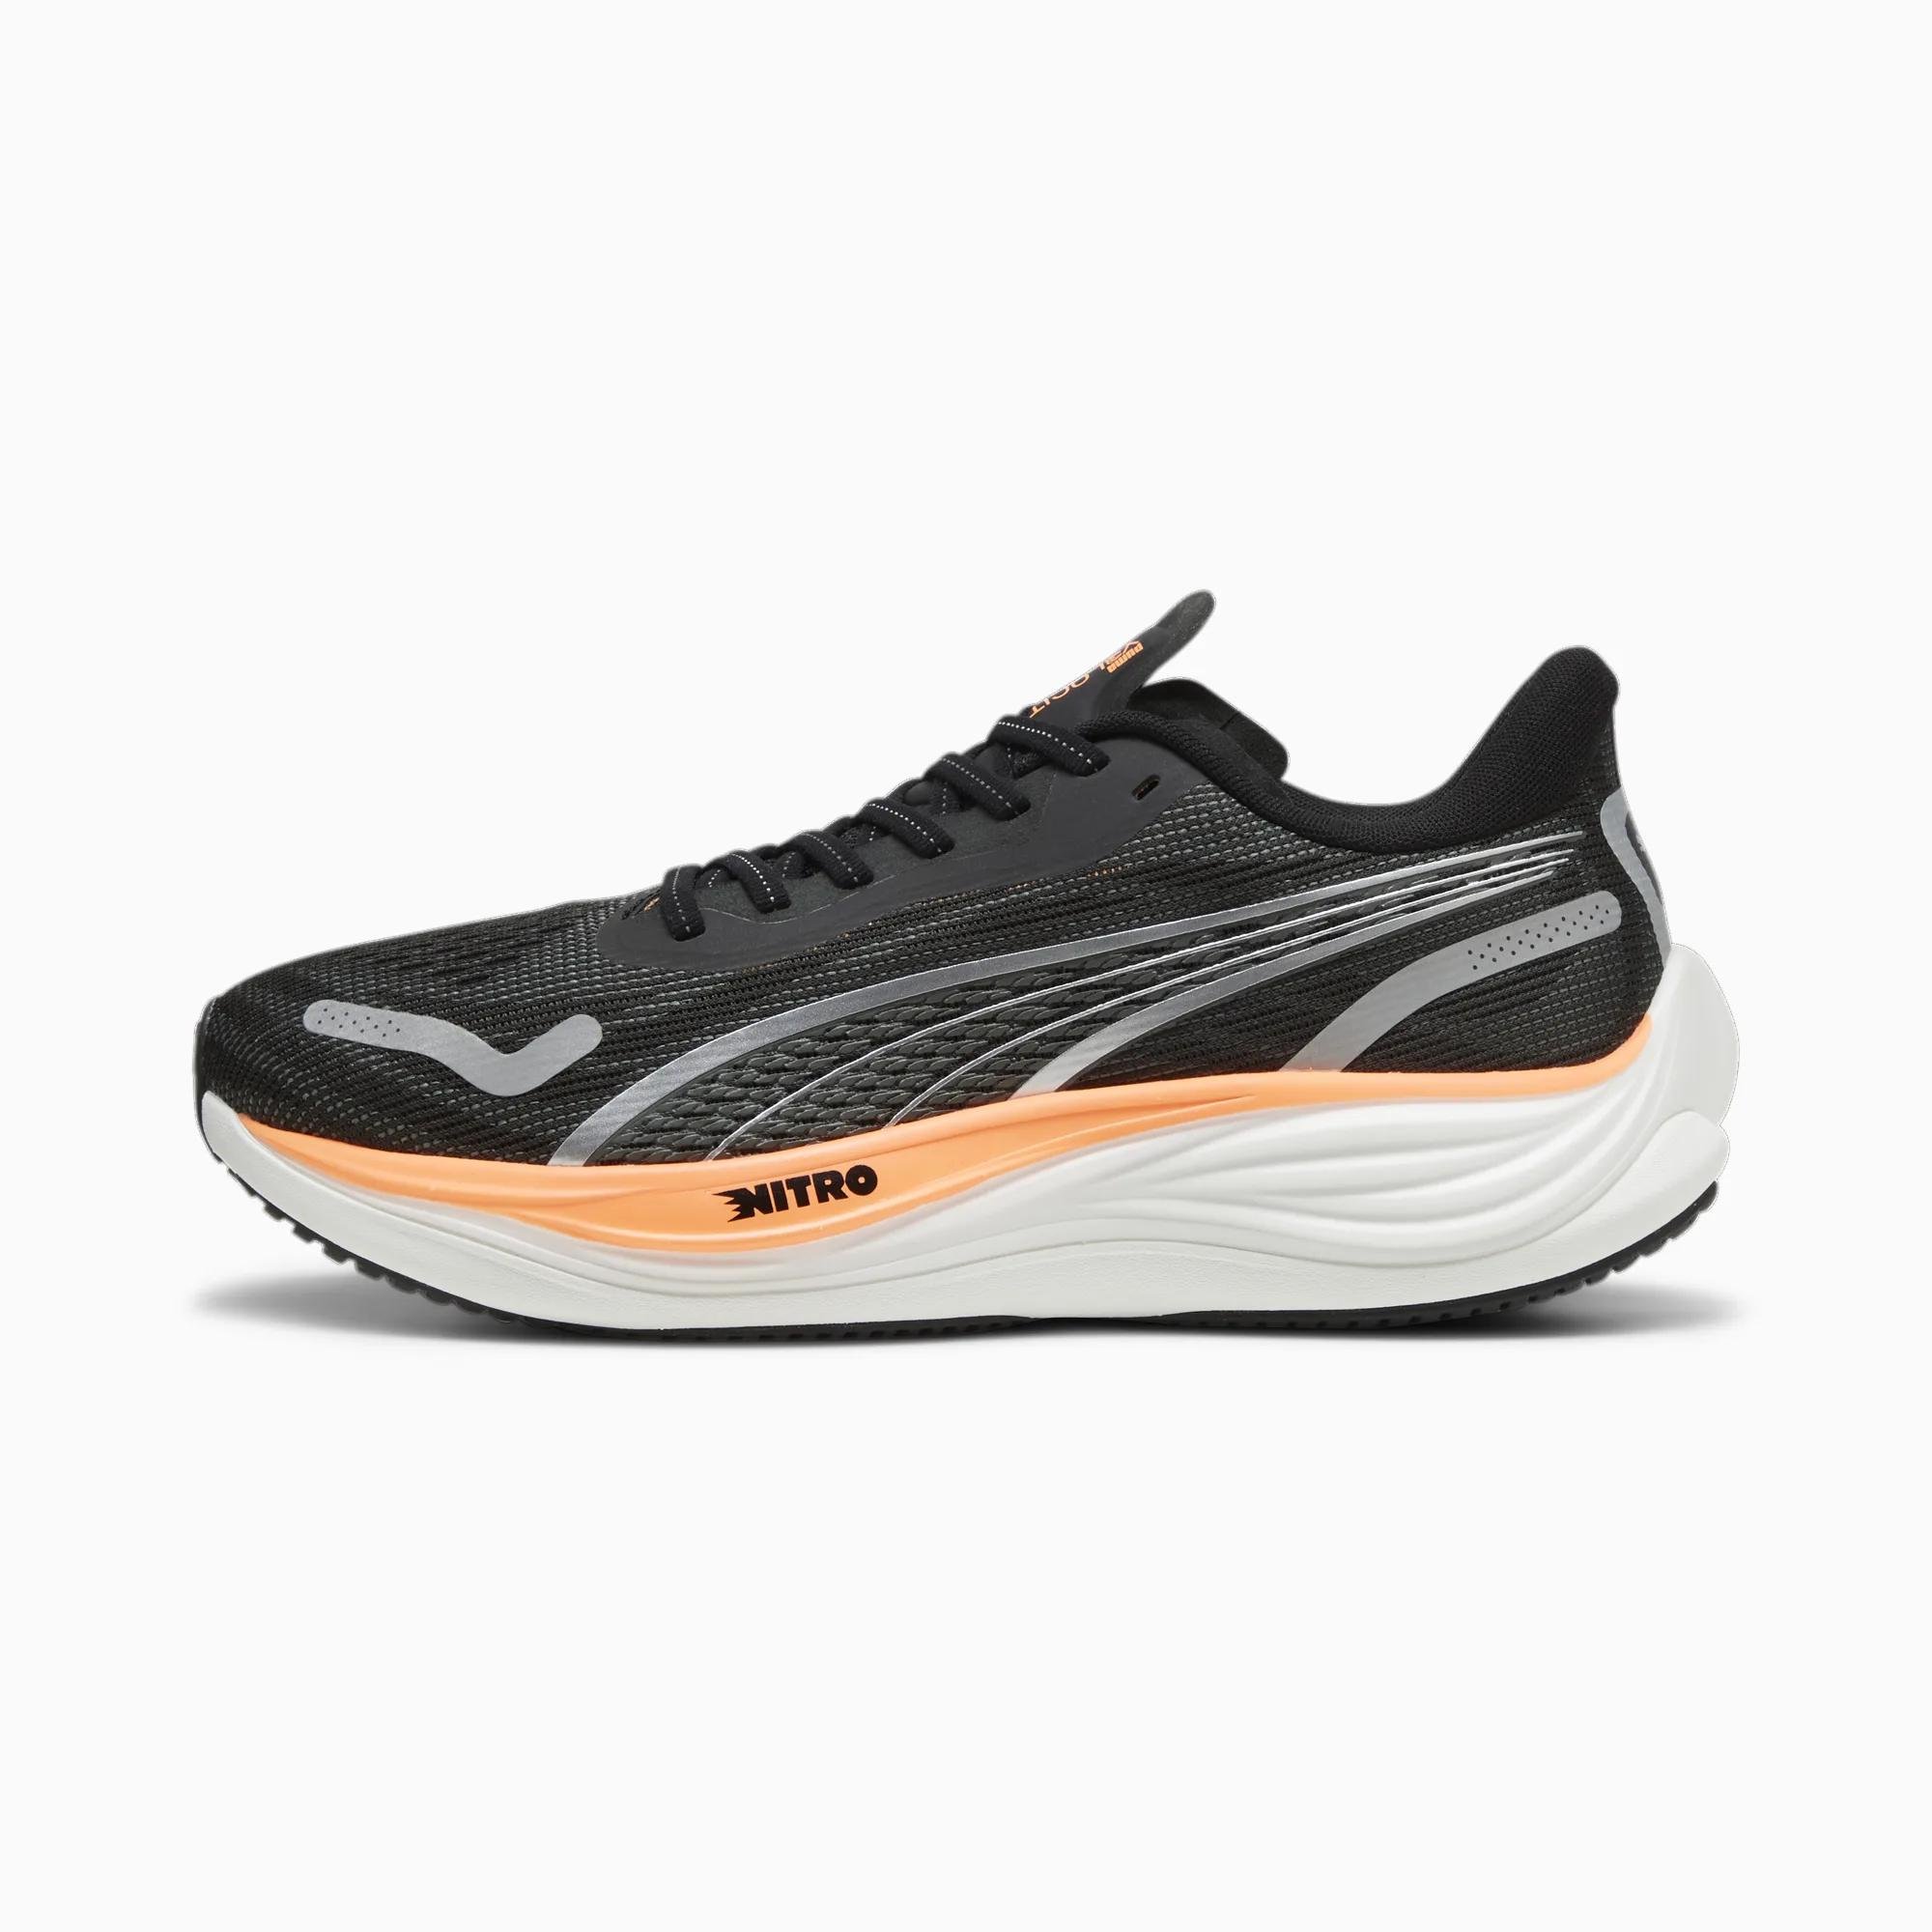 Velocity NITRO™ Men's Wide Running Shoes by PUMA